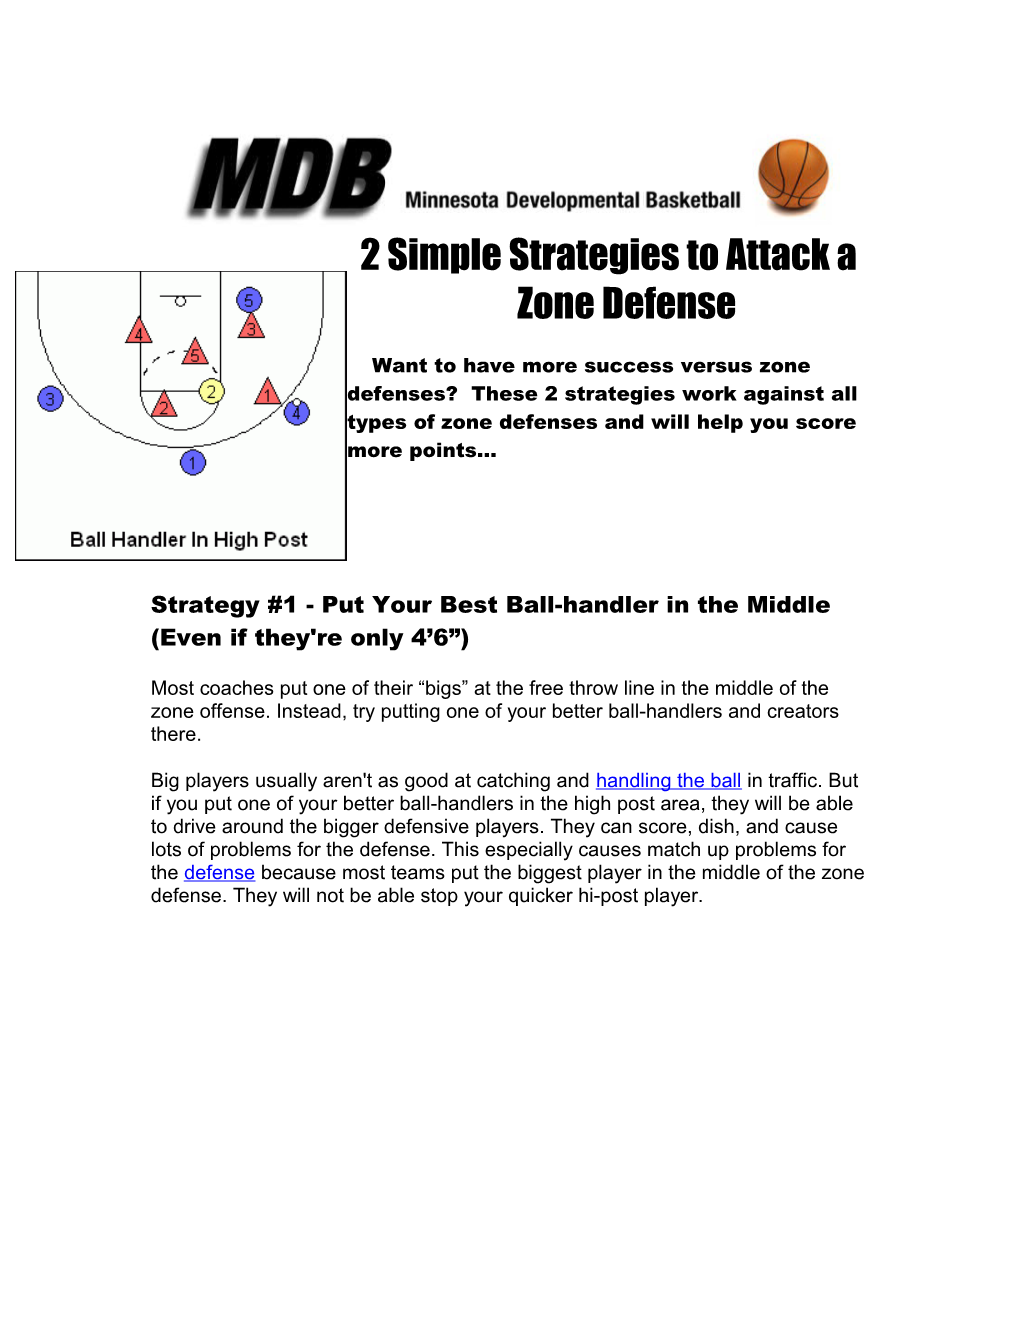 2 Simple Strategies to Attack a Zone Defense